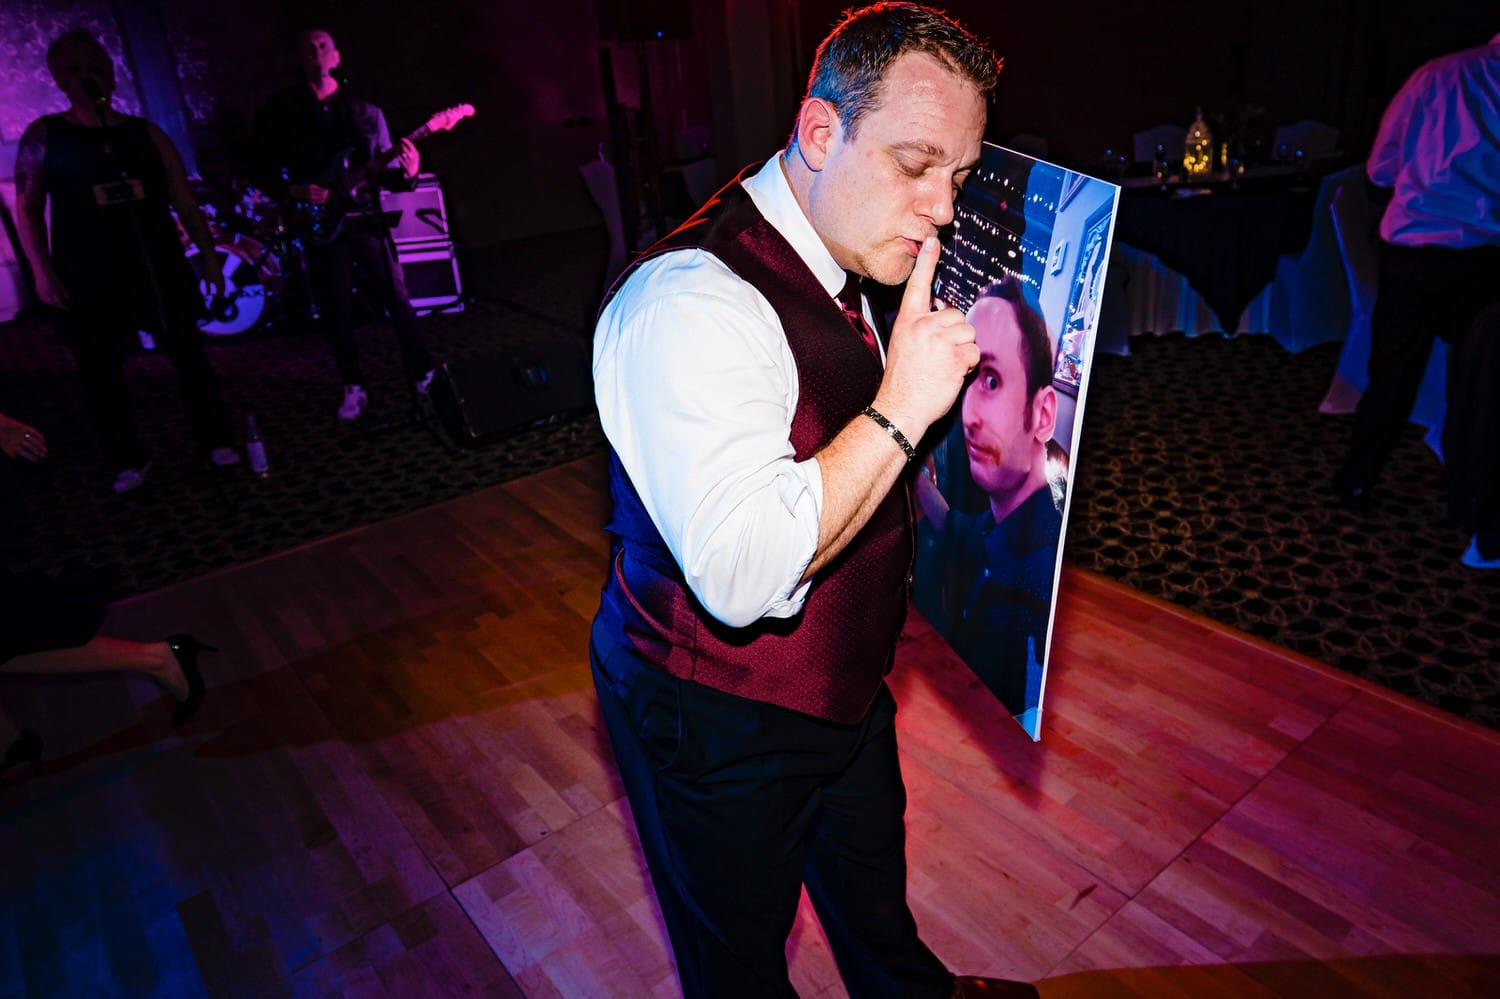 A close-up, candid picture of a groomsman dancing intimately with a printed picture of the groom during a wedding reception. 